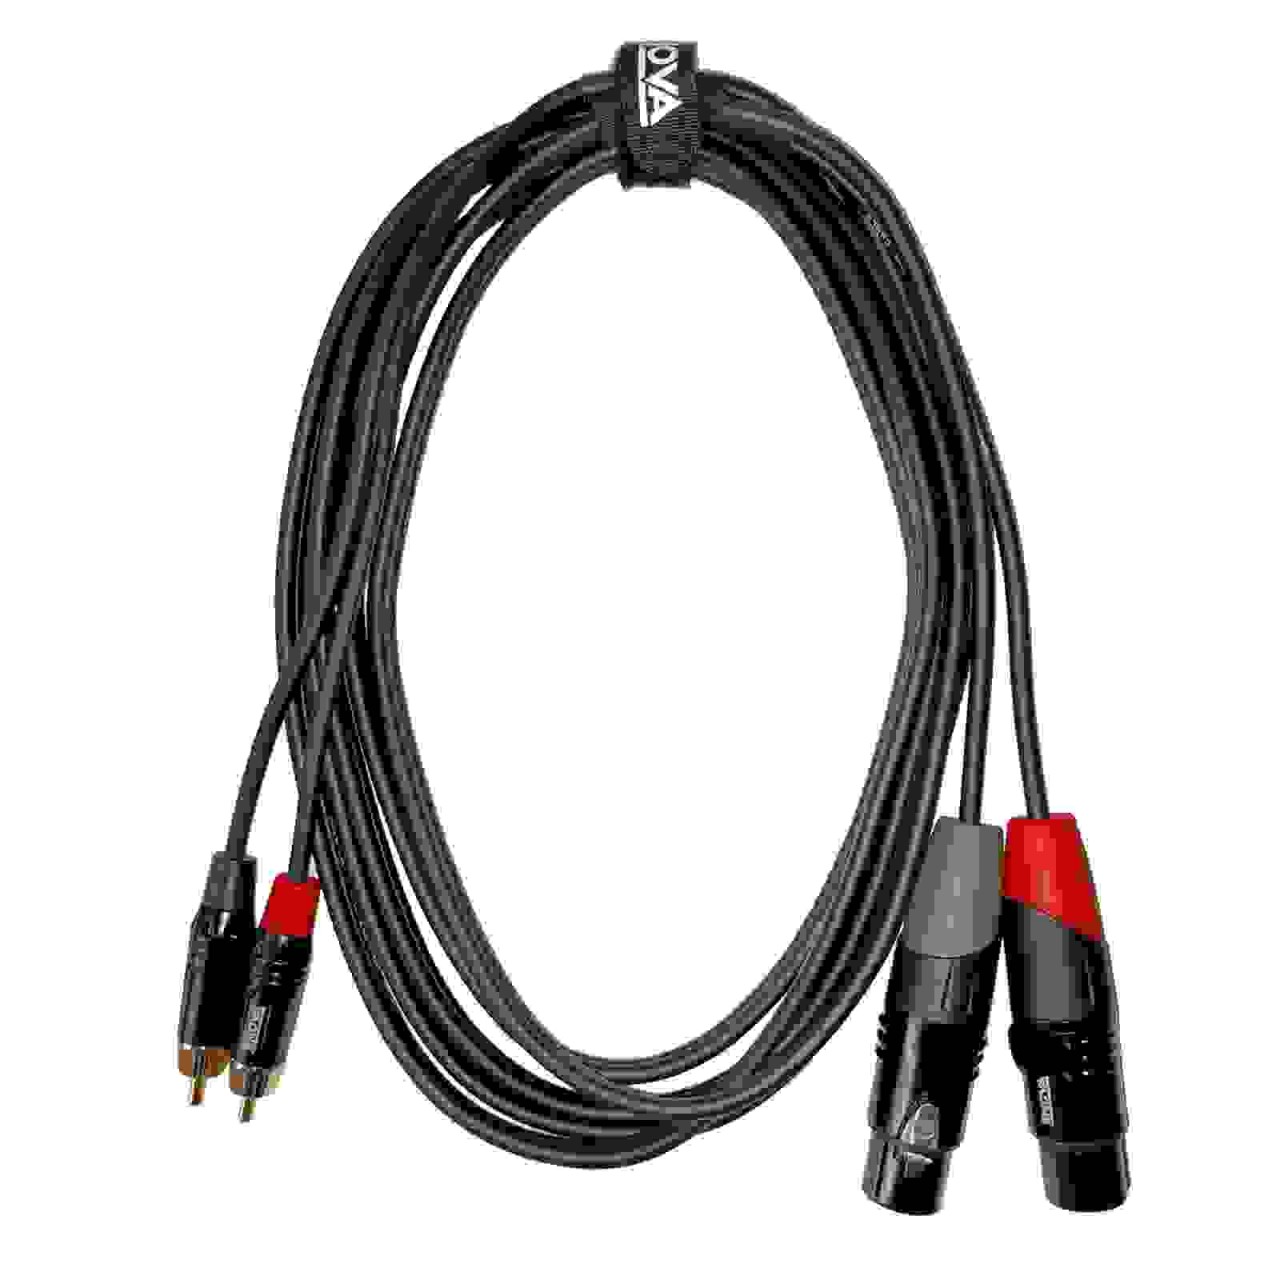 XLR female to RCA male 3 meters. ENOVA audio cable technology. EC-A3-CLMXLF-3